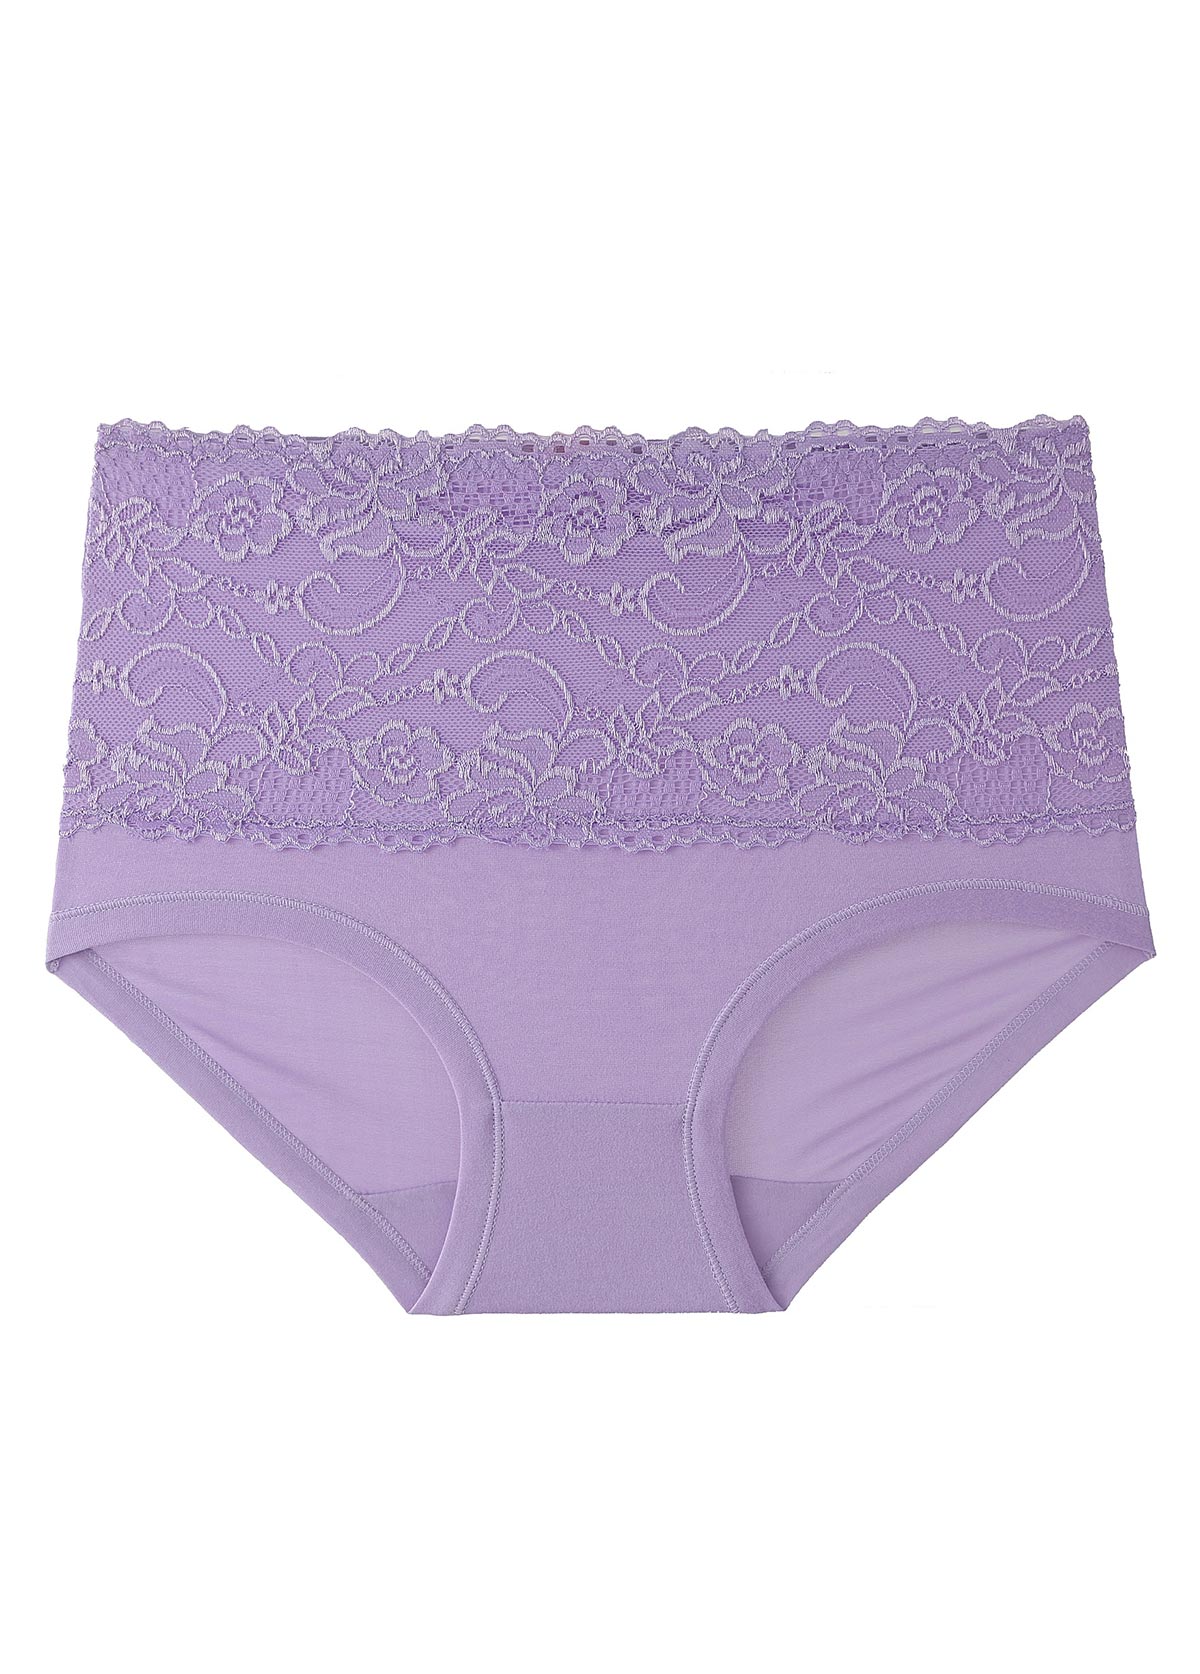 Lace Patchwork Light Purple High Waisted Panty